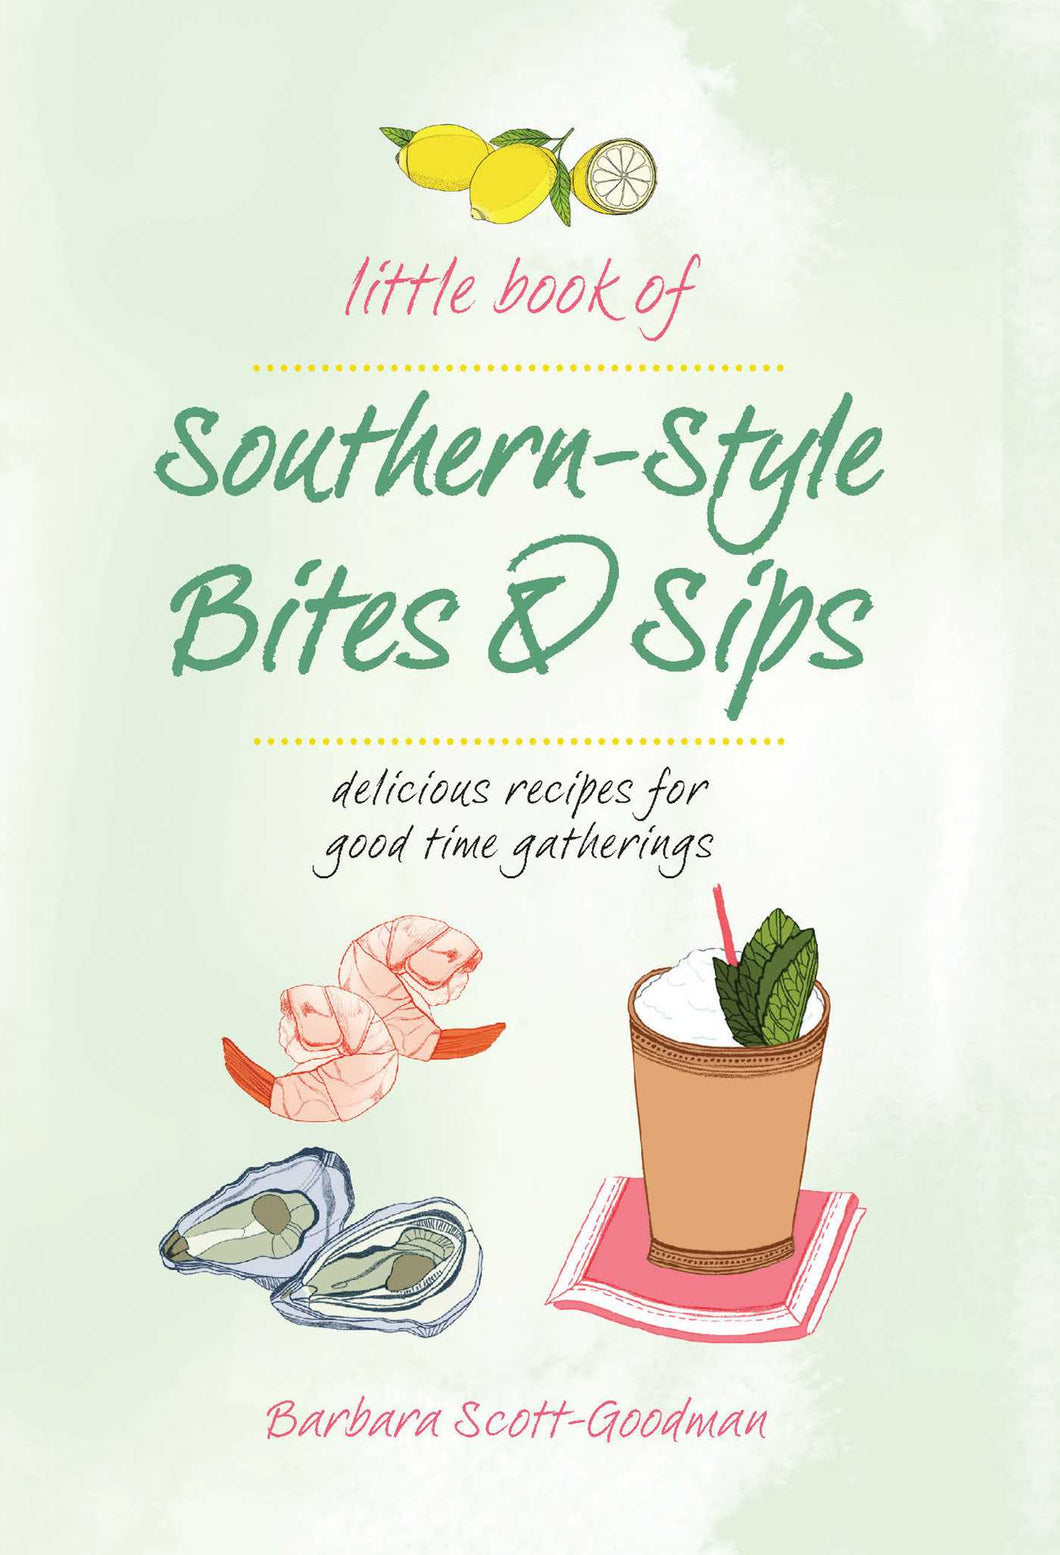 Little Book of Southern Style Bites